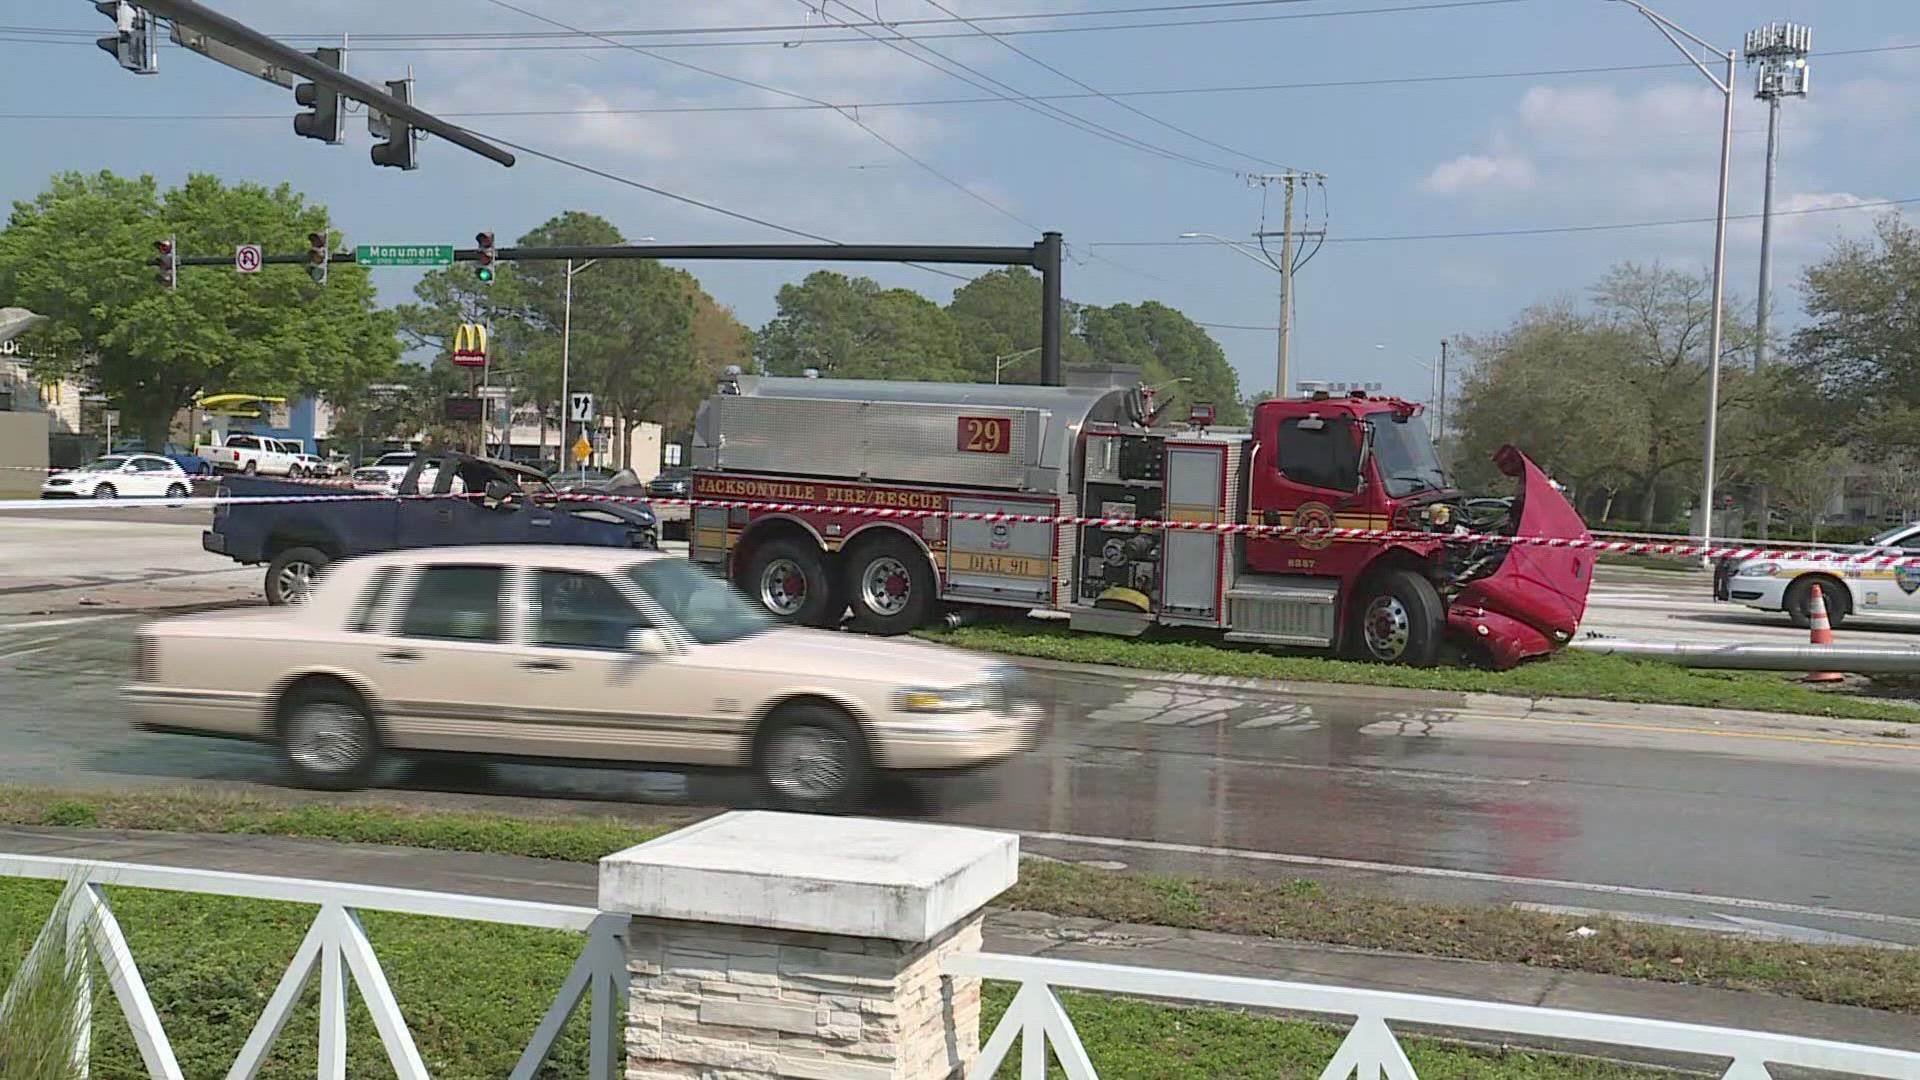 The wreck occurred just before 1:30 p.m. Friday at the intersection of Monument and McCormick roads.